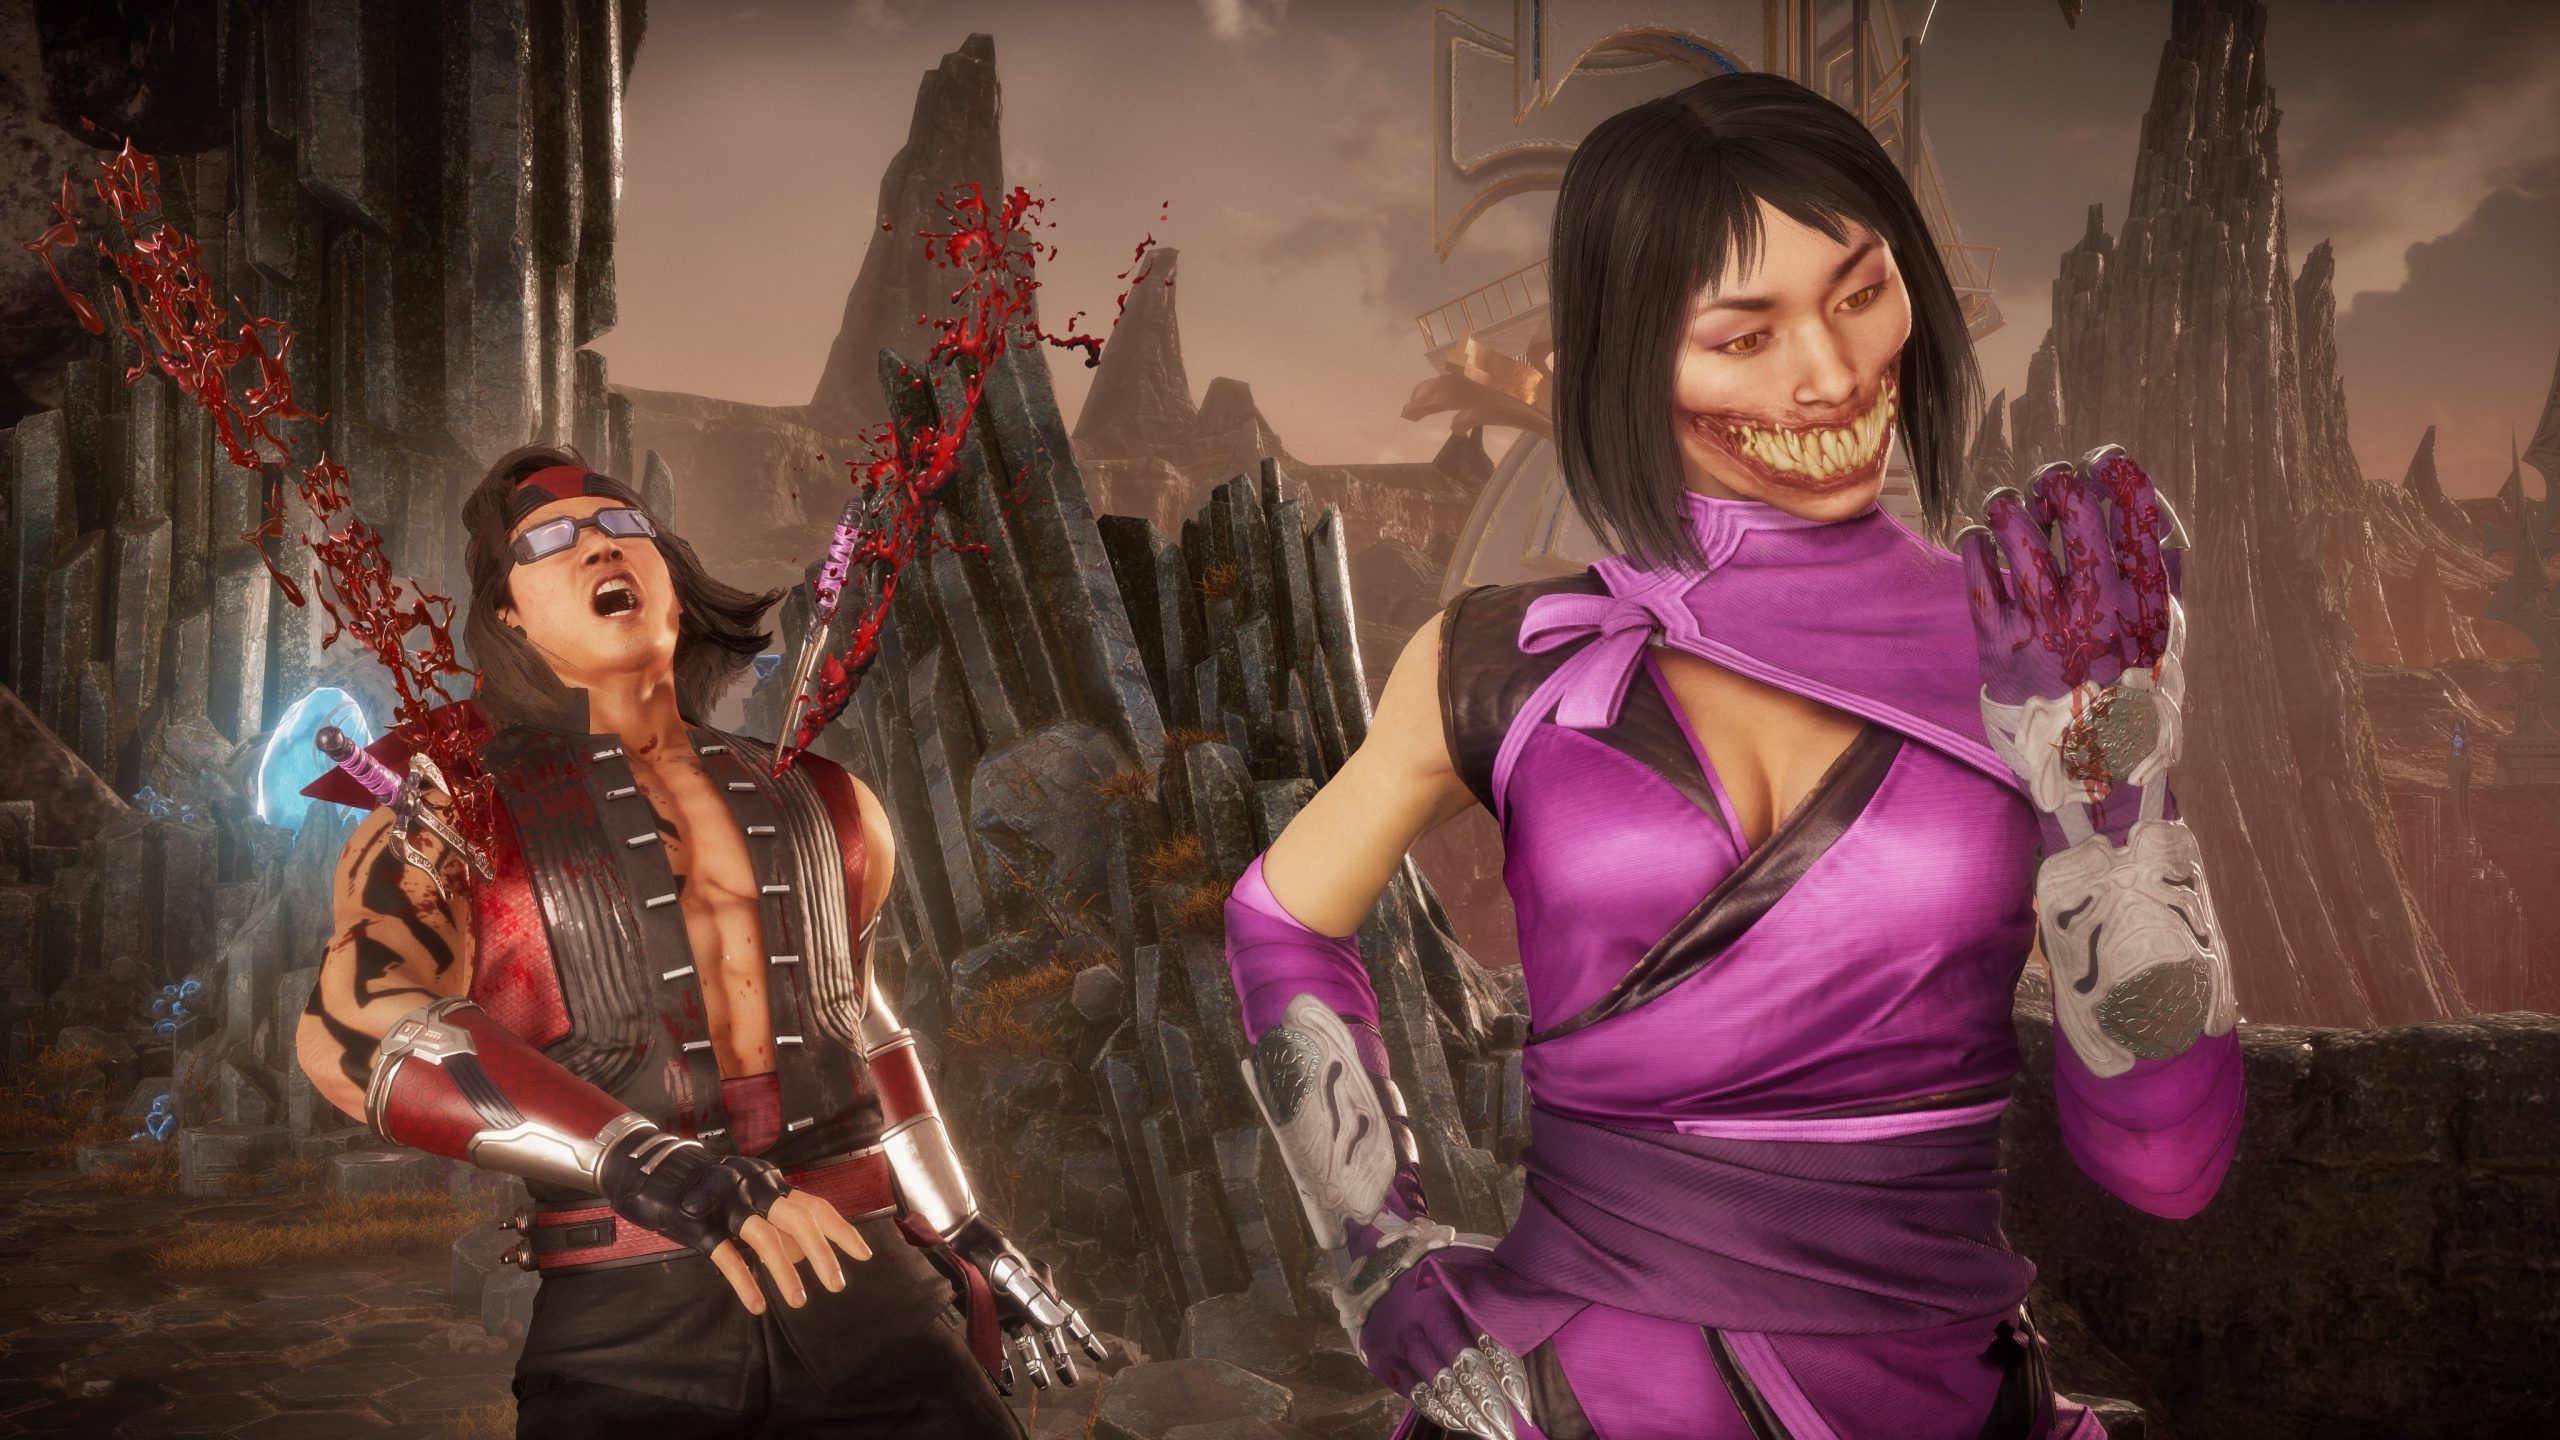 Mortal Kombat 11 Next DLC Fighters are Rambo, Rain, and Mileena; PS5 and XSX Upgrades Available for Free